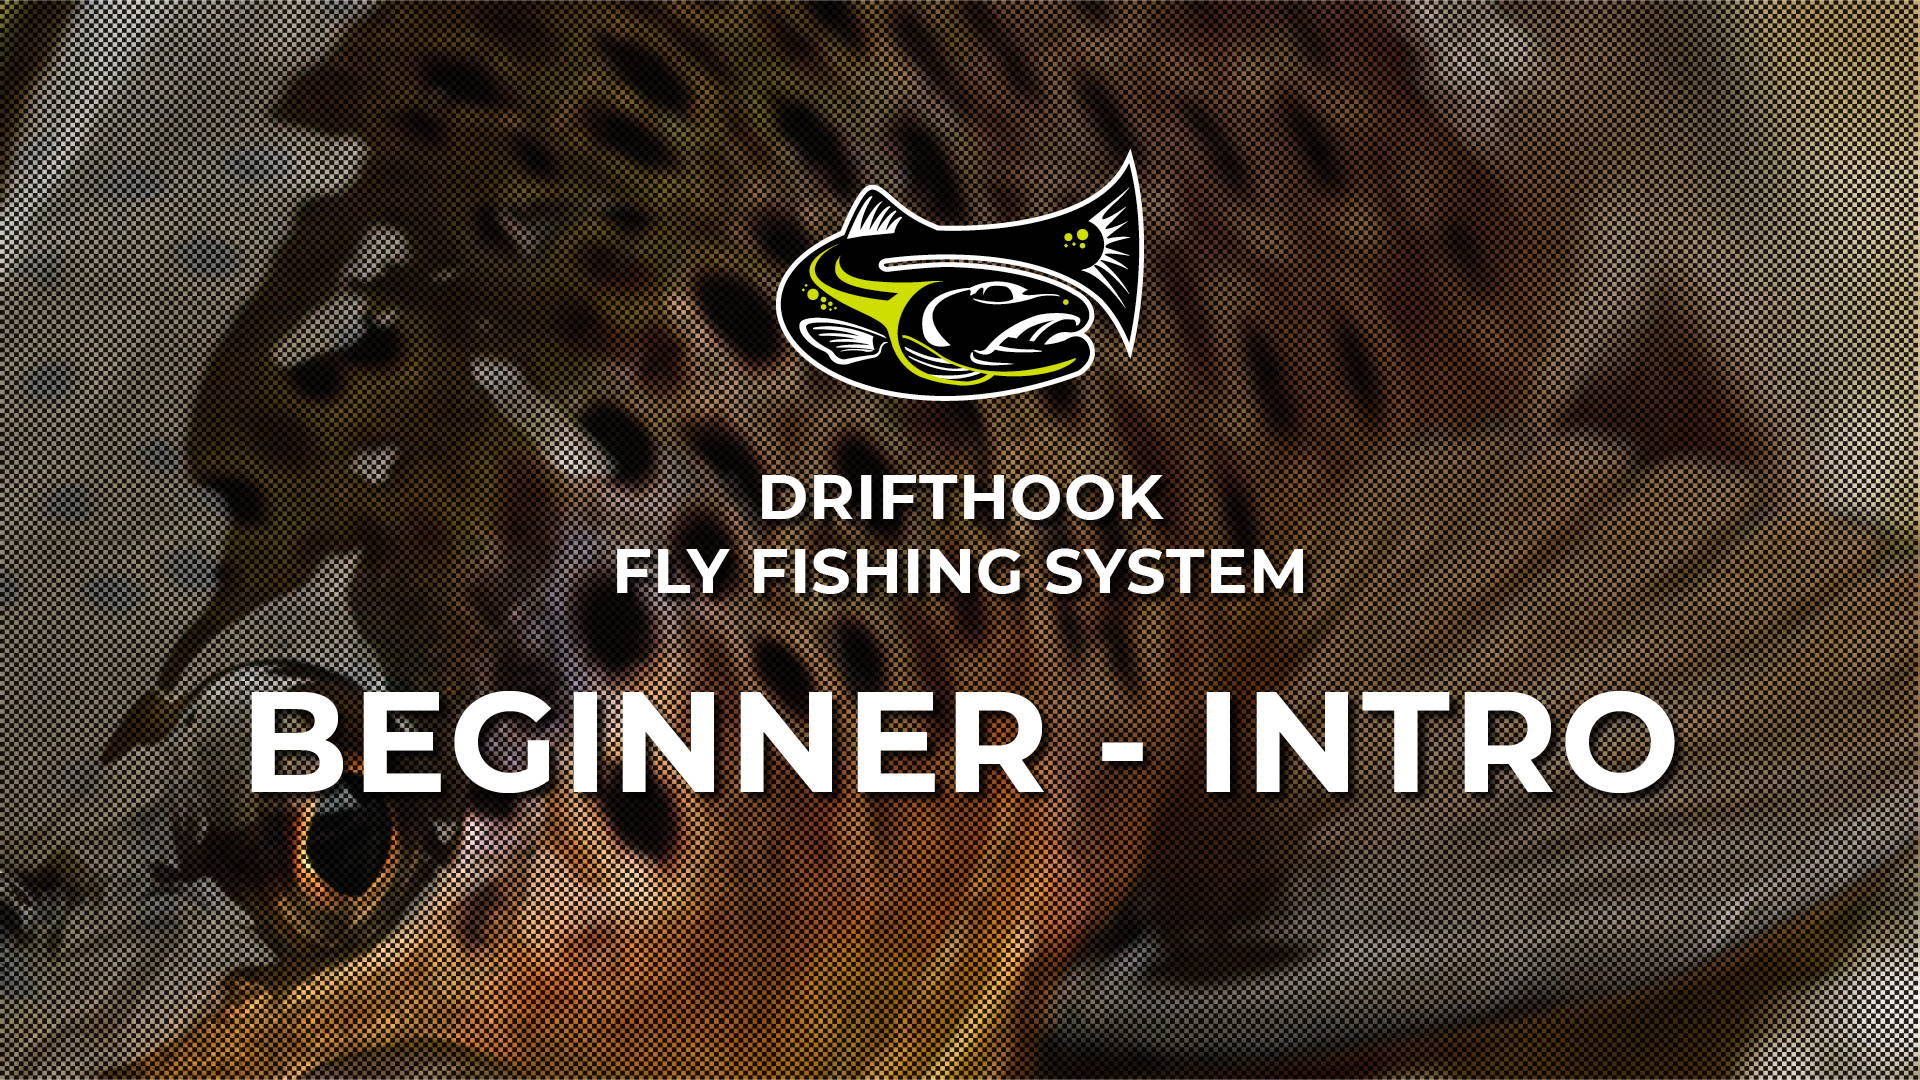 Fly Fishing for Beginners - 17 Videos to Get You Started